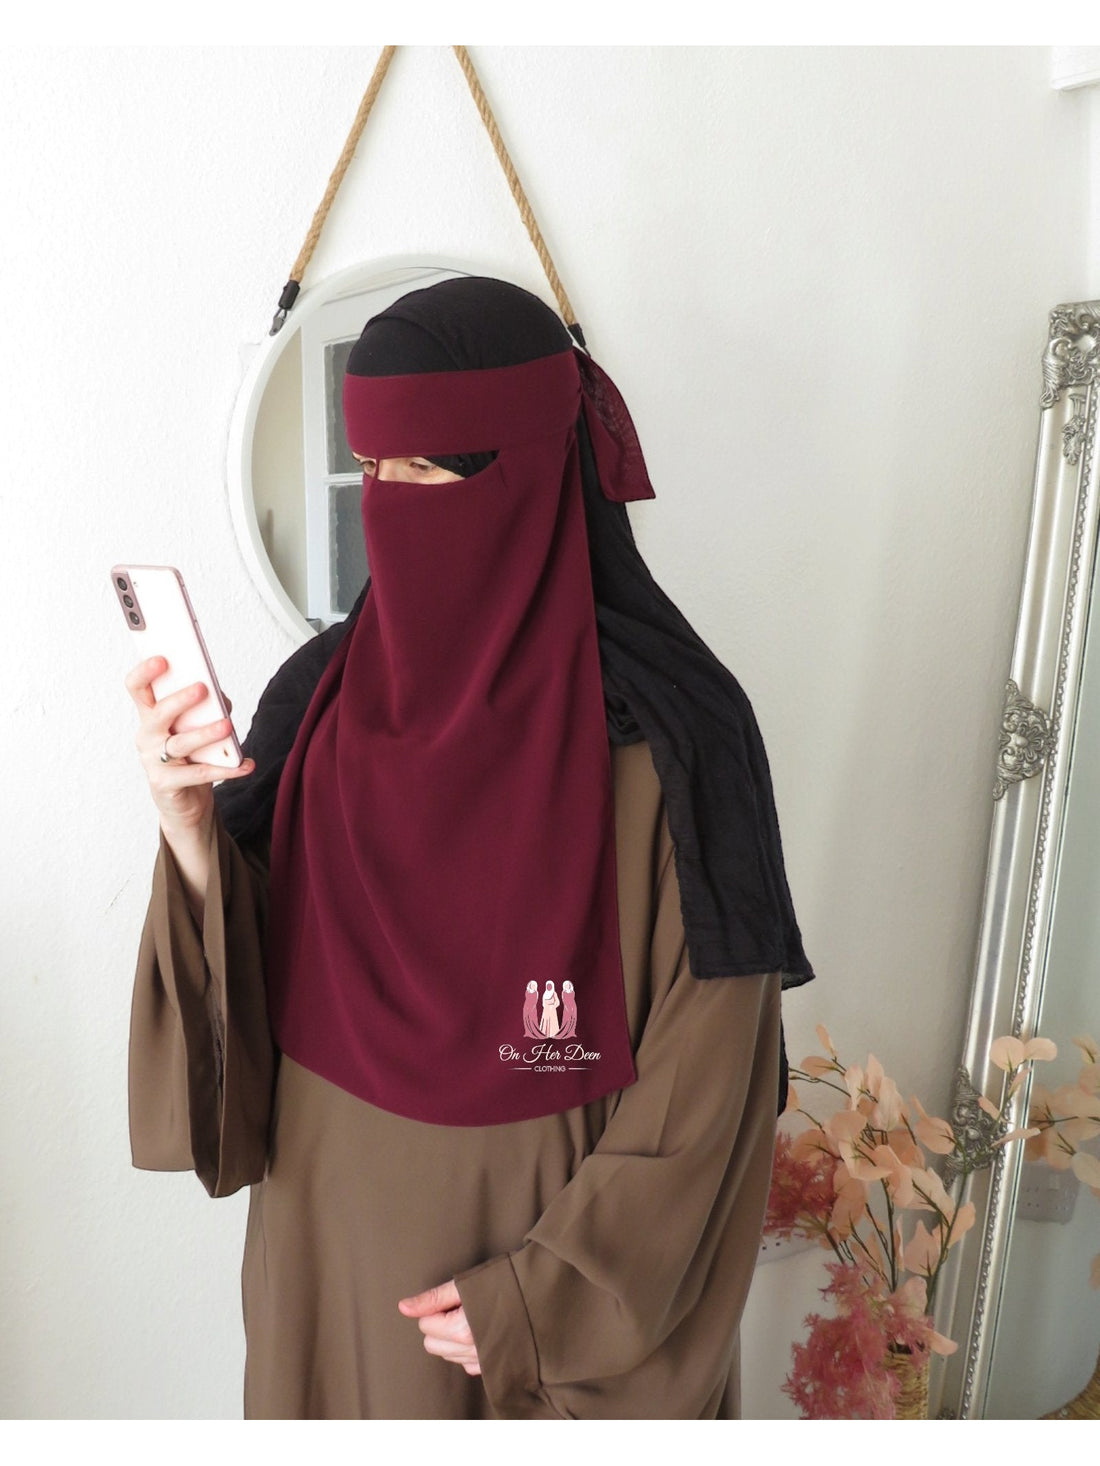 1 Layer Nose String Niqab - OnHerDeen